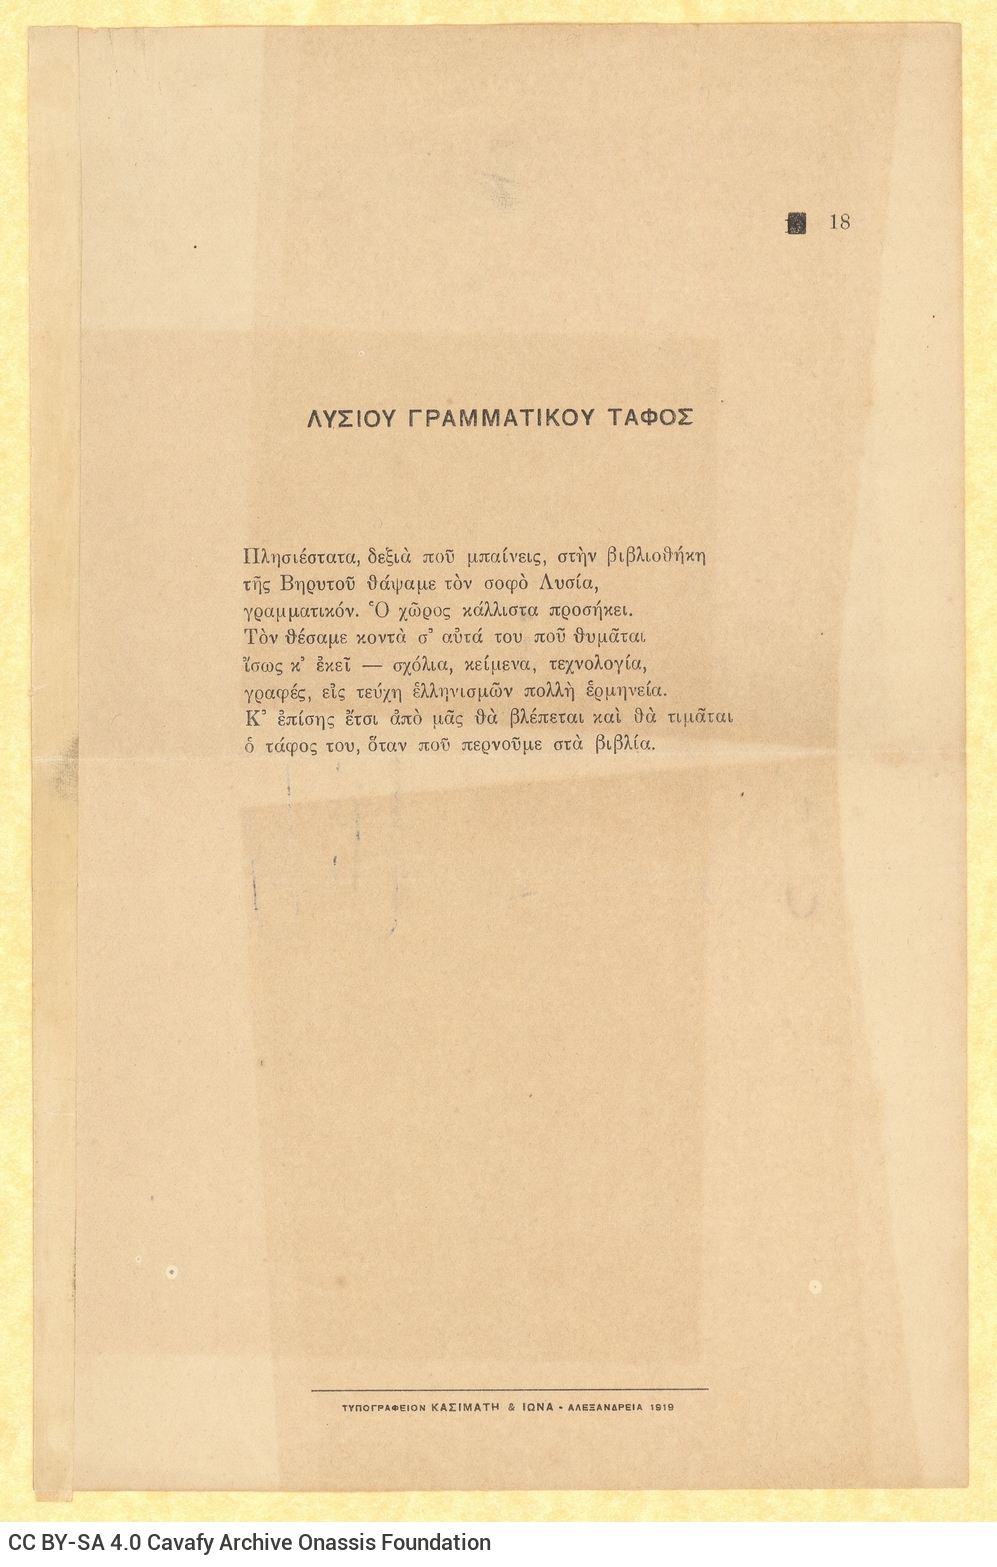 Handwritten English translation of the poem "The Tomb of Lysias the Grammarian" by G. Valassopoulo on one side of a sheet,